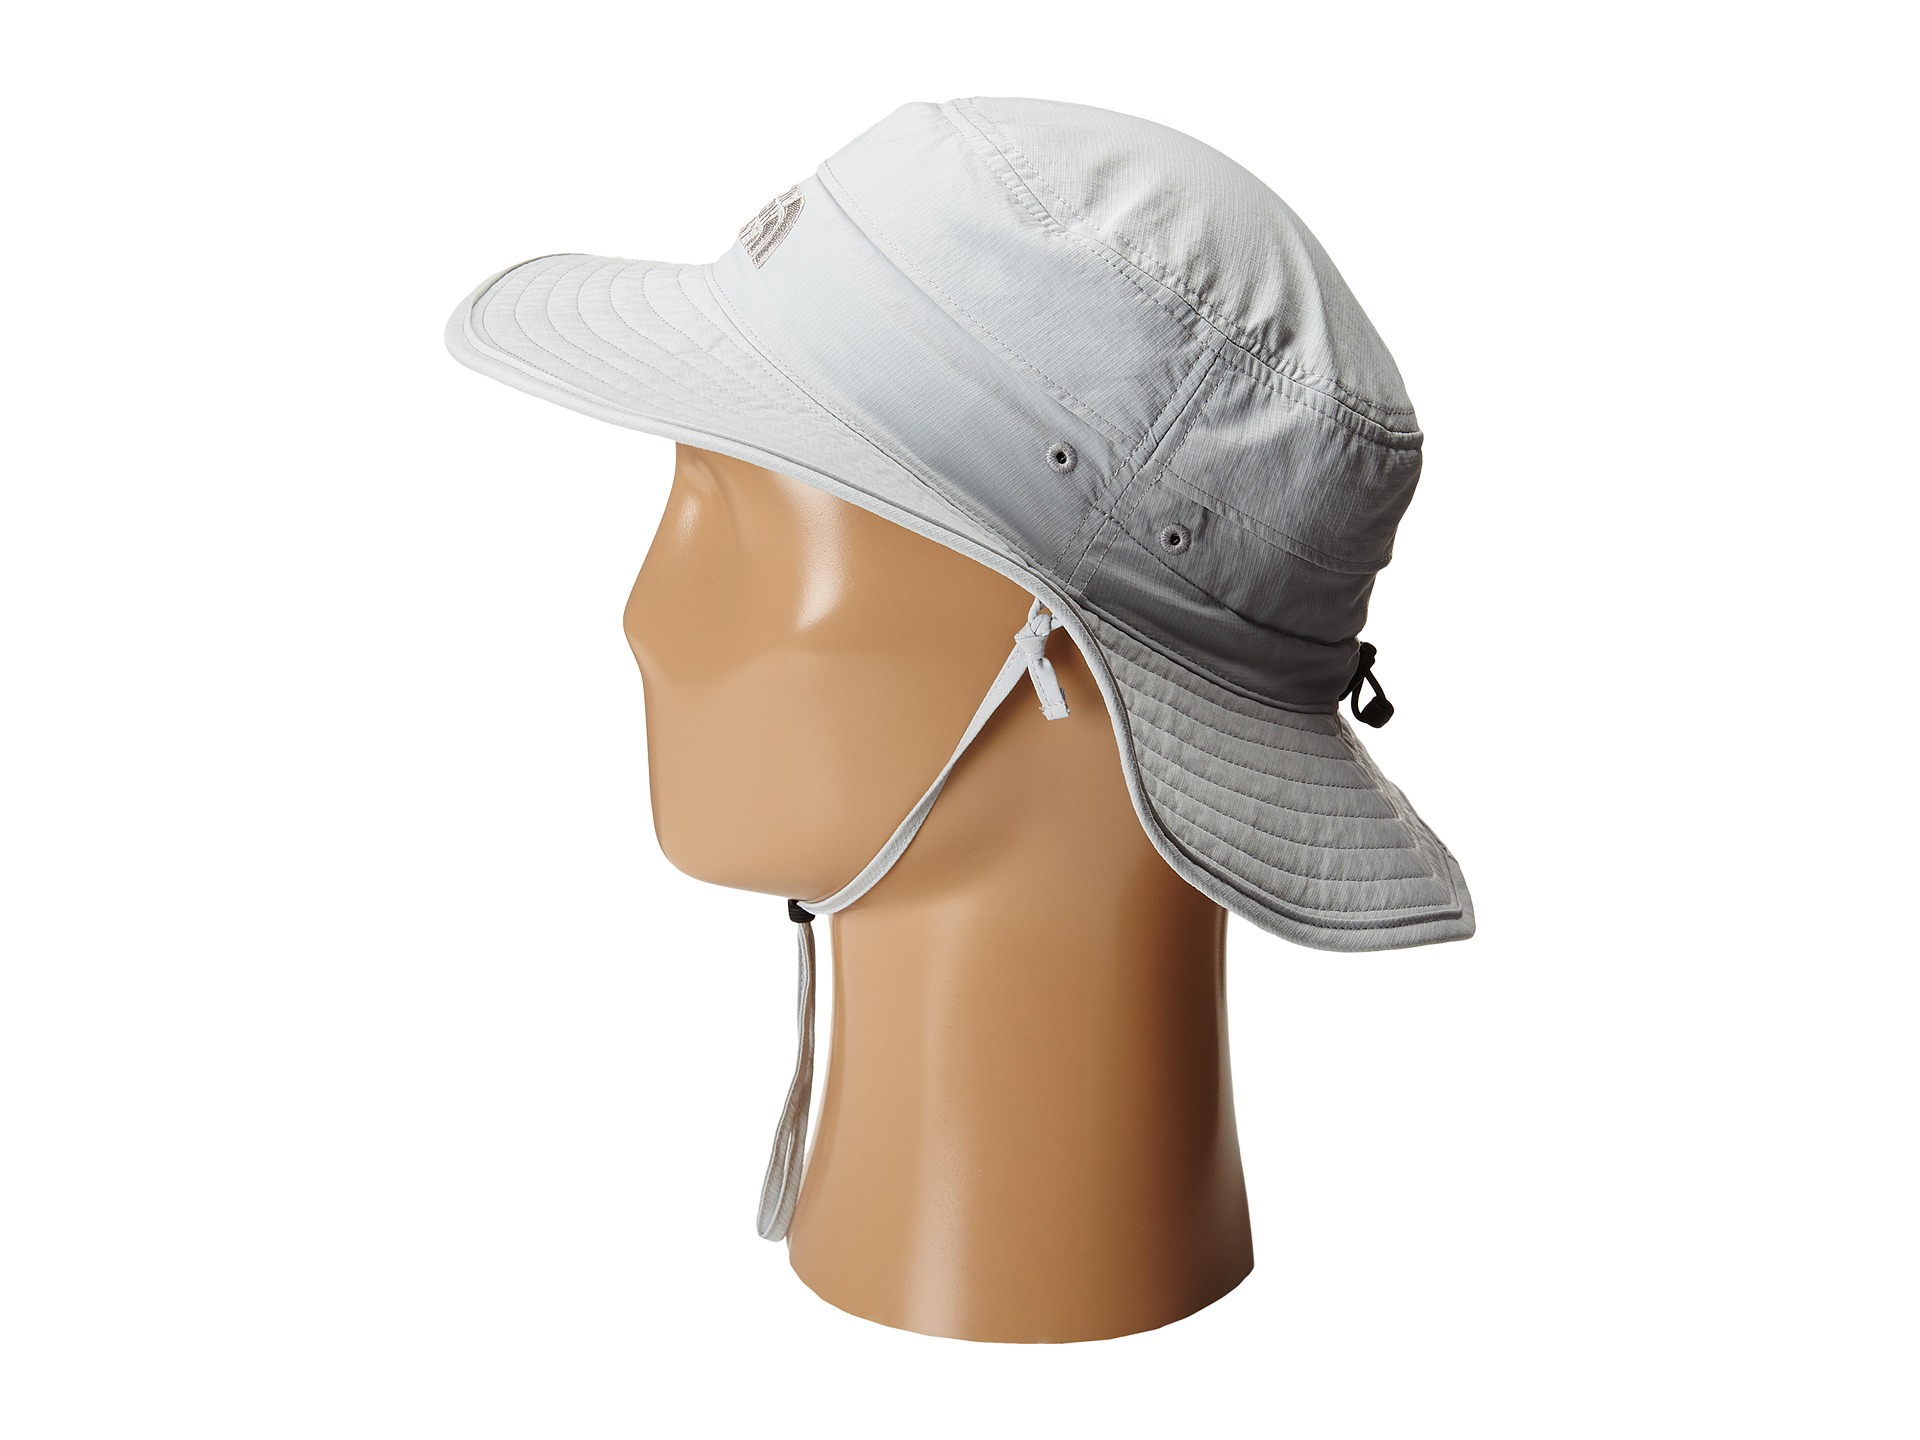 Lyst - The North Face Horizon Breeze Brimmer Hat in Gray